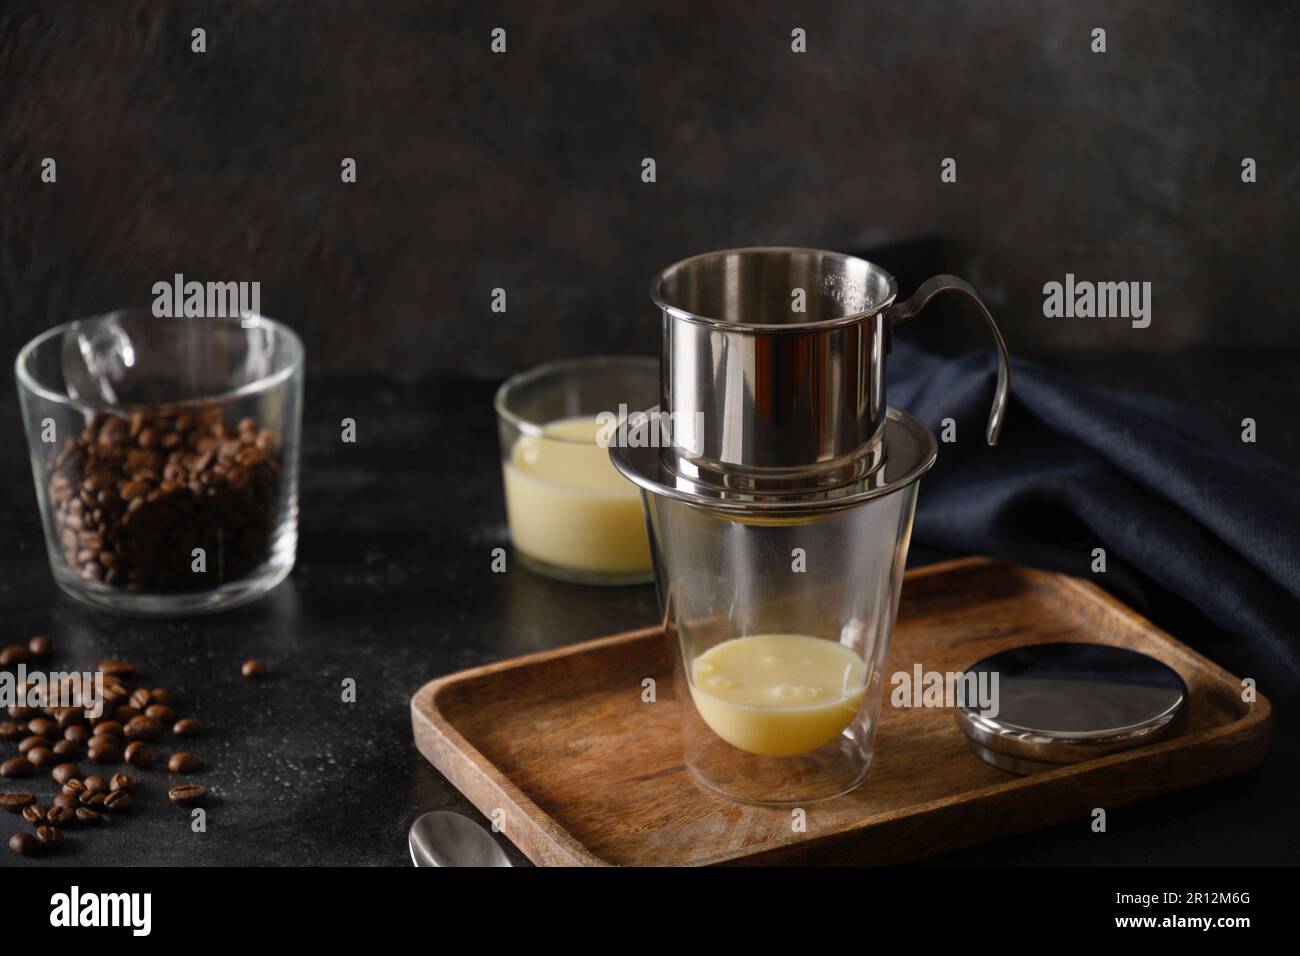 https://c8.alamy.com/comp/2R12M6G/traditional-method-of-making-of-vietnamese-coffee-with-sweet-condensed-milk-in-glass-cup-on-black-background-close-up-2R12M6G.jpg